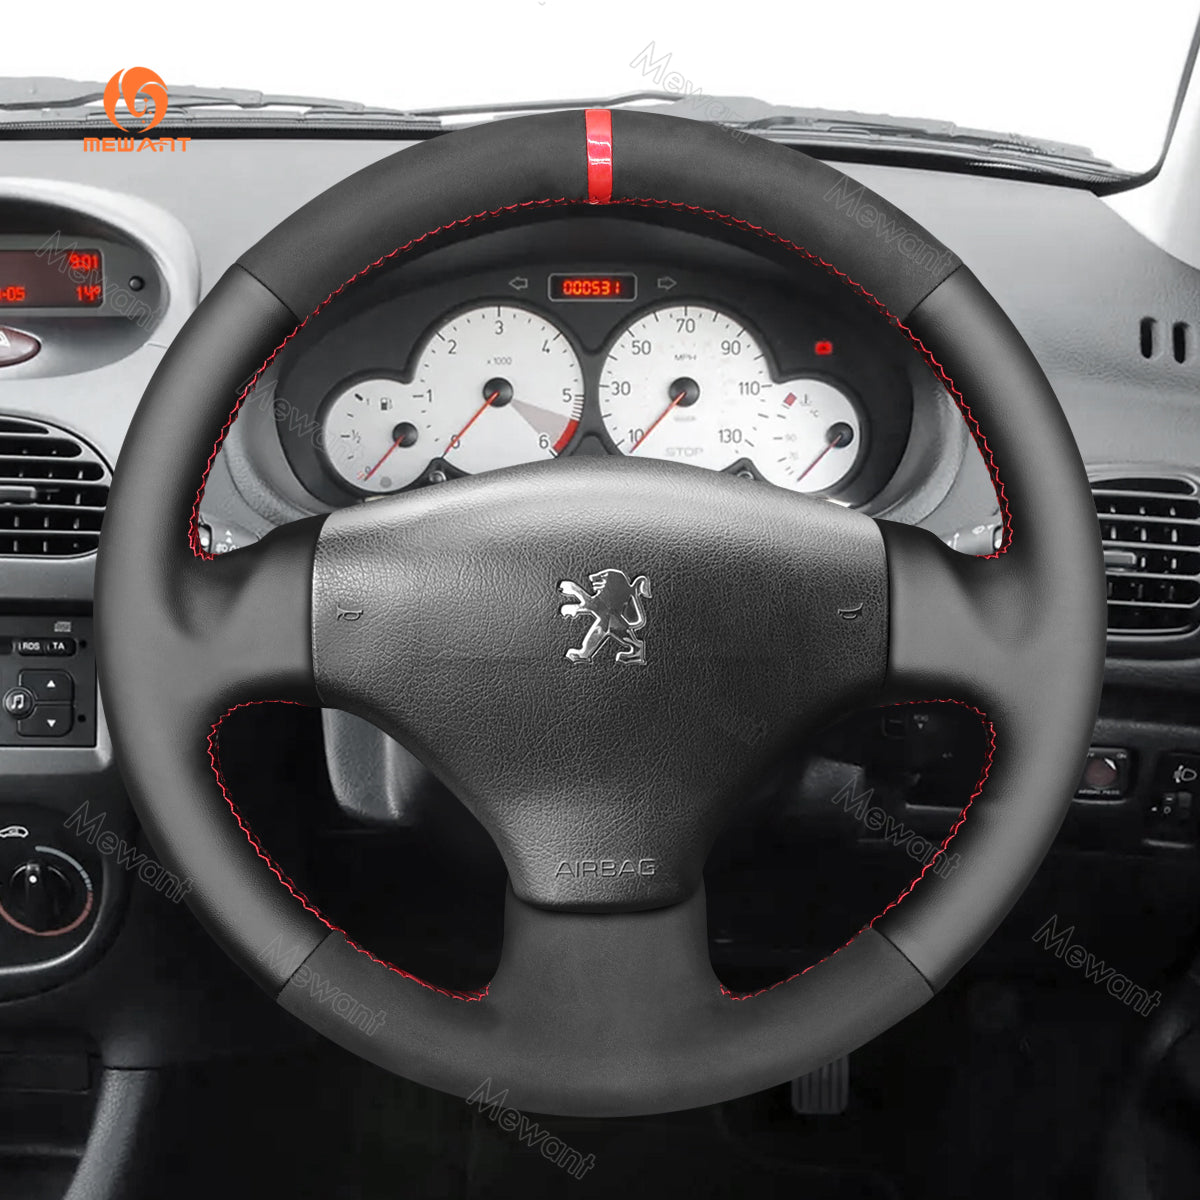 MEWANT Hand Stitch Car Steering Wheel Cover for Peugeot 206 2001-2009 / 206 SW 2002-2007